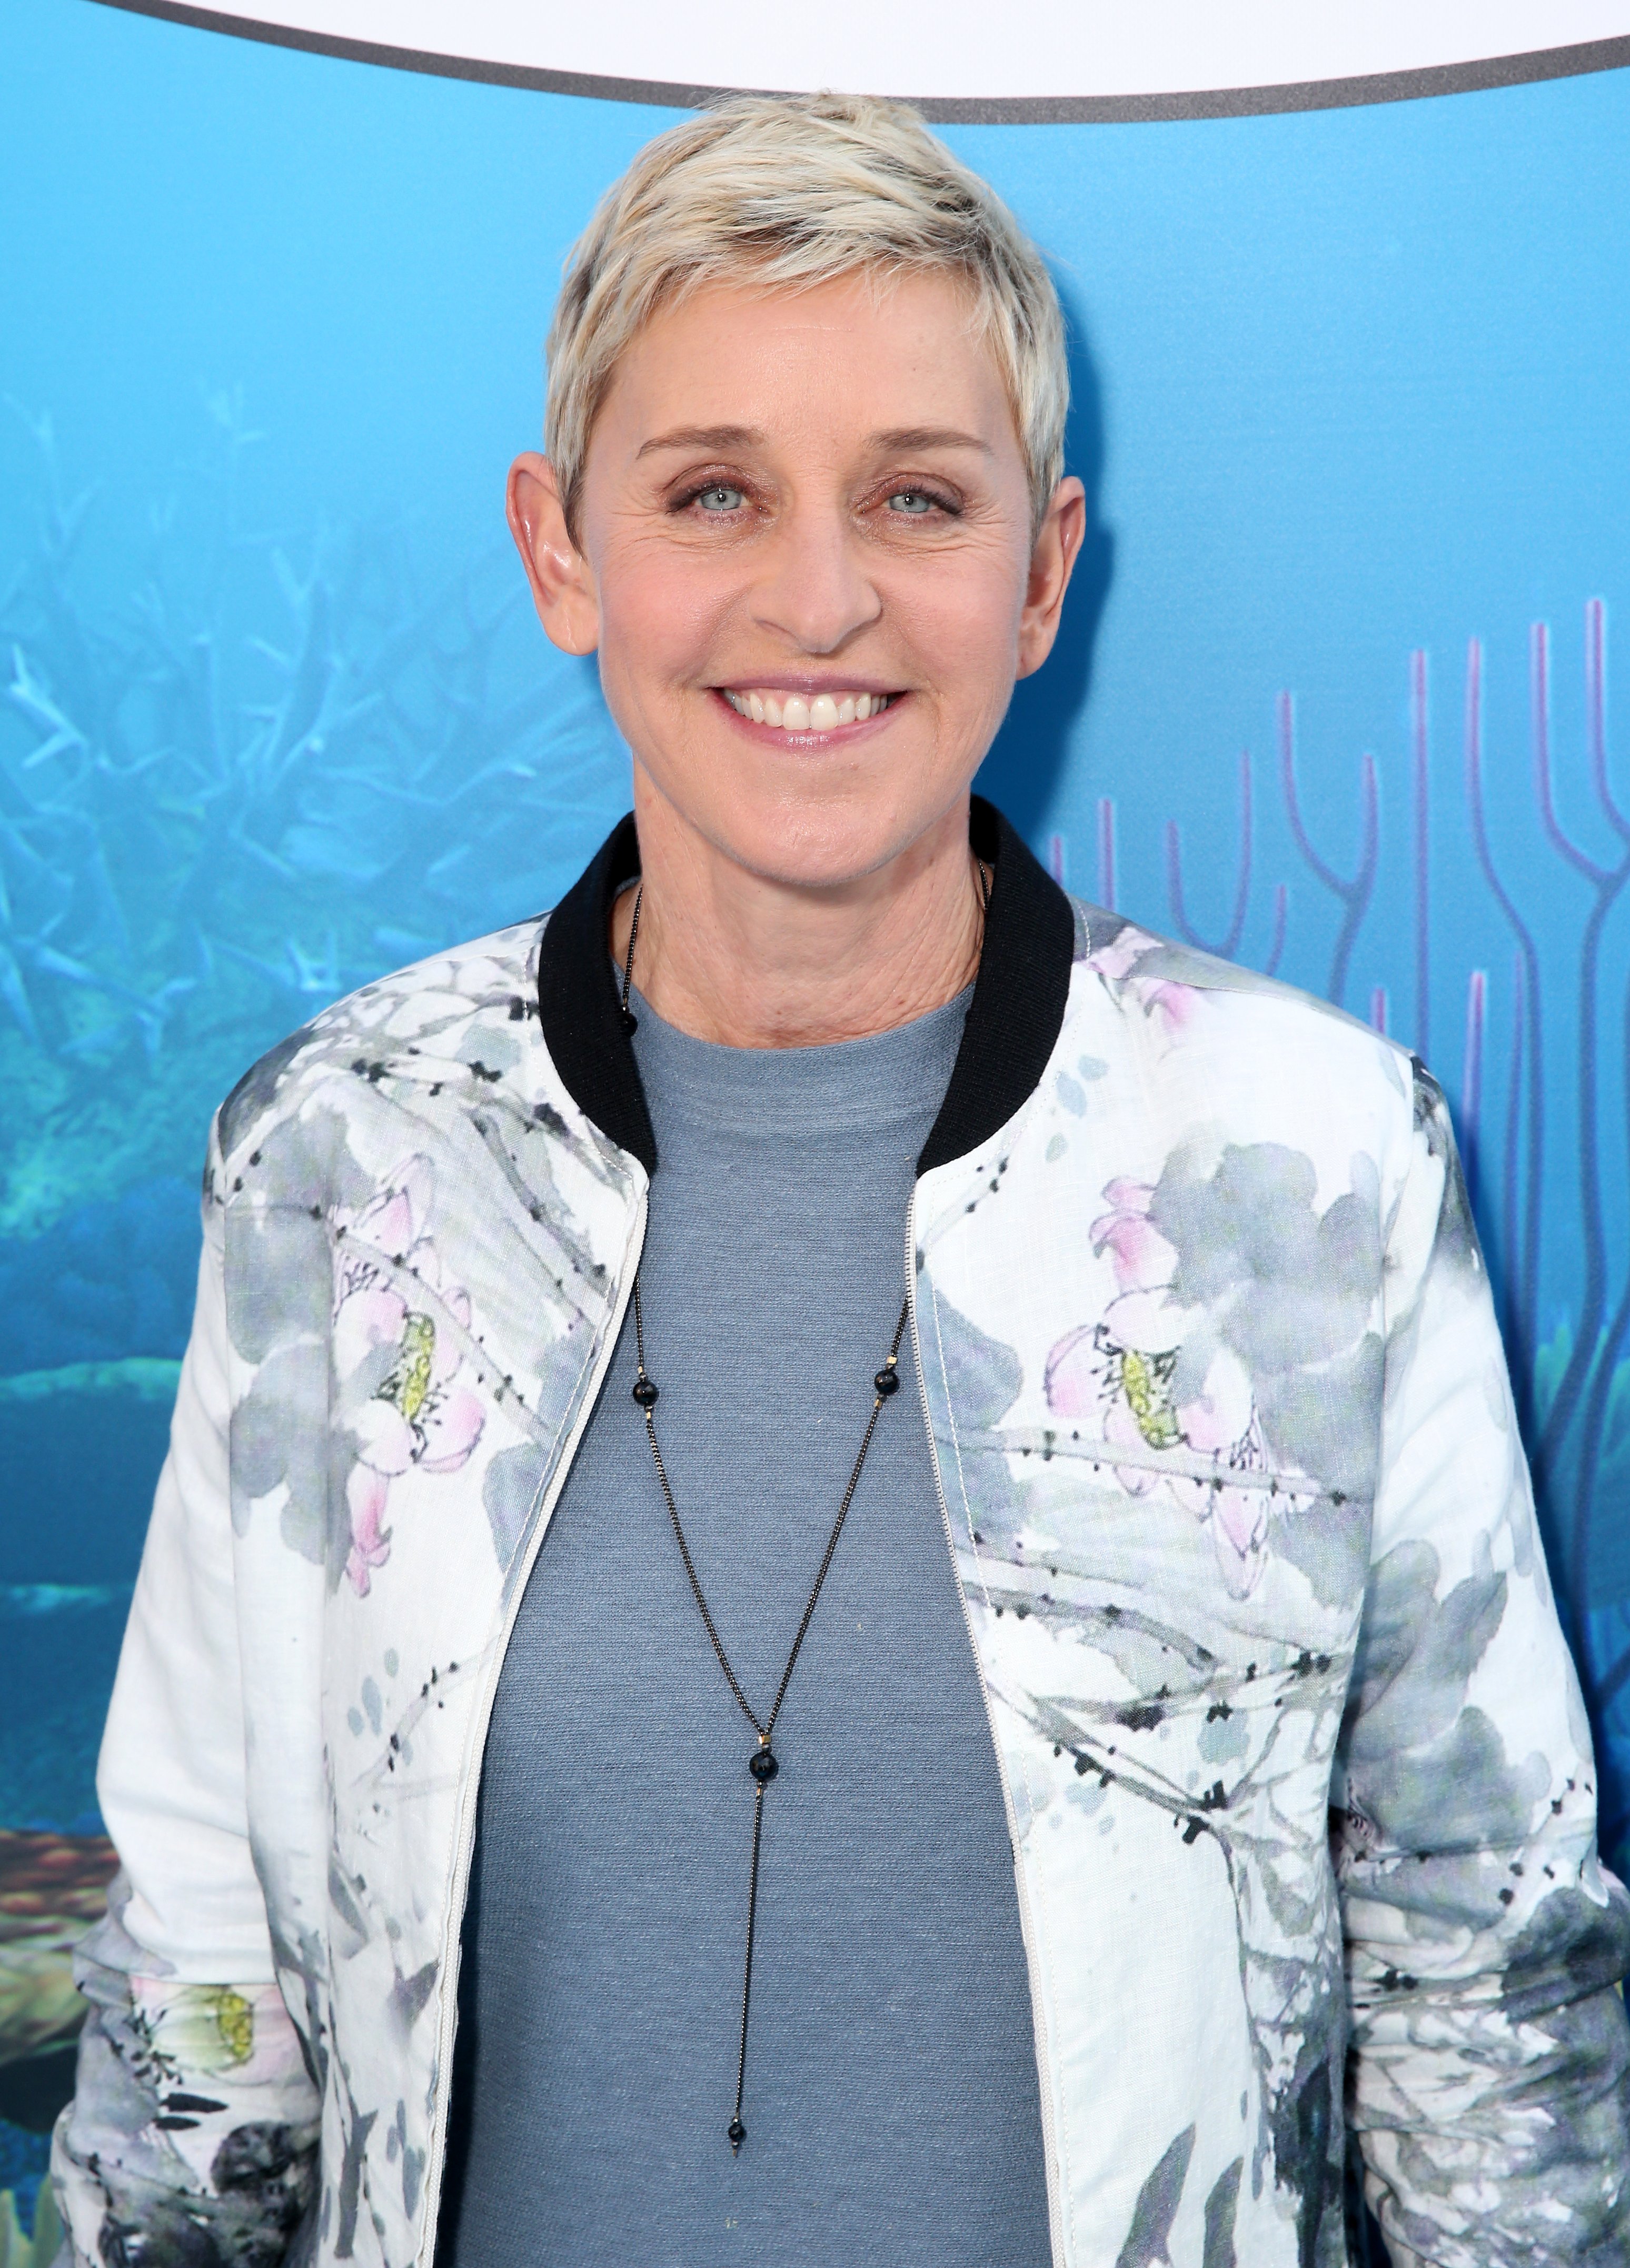 Ellen DeGeneres attends the premiere of "Finding Dory" in Hollywood, California on June 8, 2016 | Photo: Getty Images